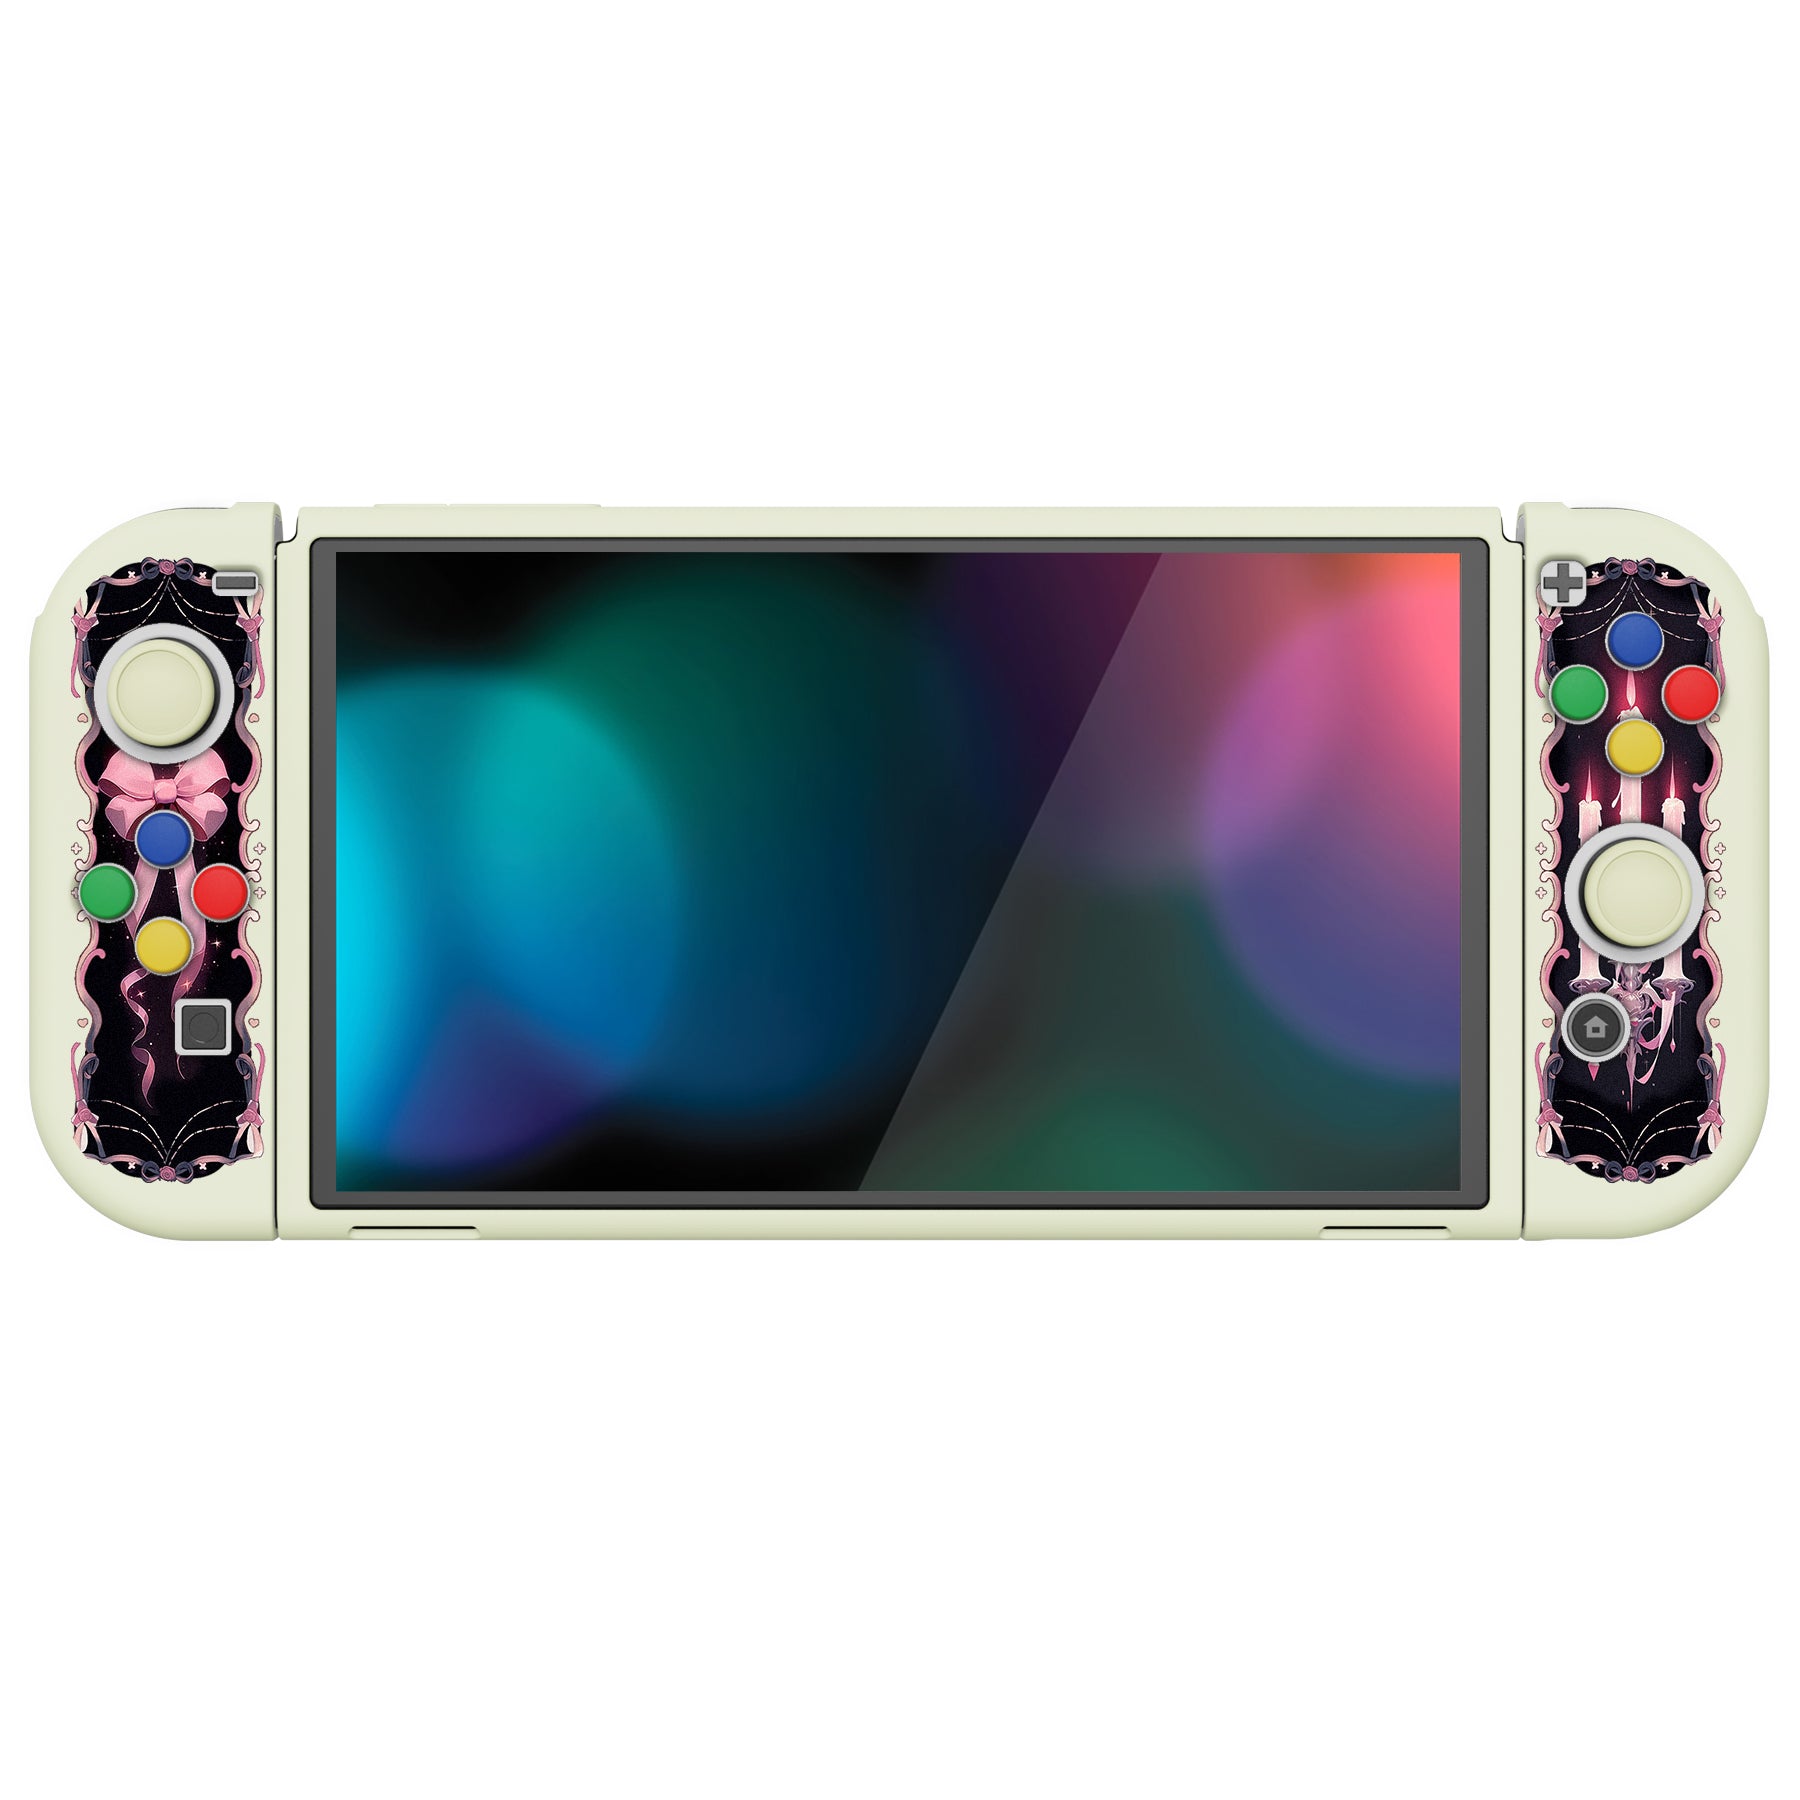 PlayVital ZealProtect Soft TPU Slim Protective Case with Thumb Grip Caps & ABXY Direction Button Caps for NS Switch OLED - Darkling Sheep - XSOYV6050 playvital